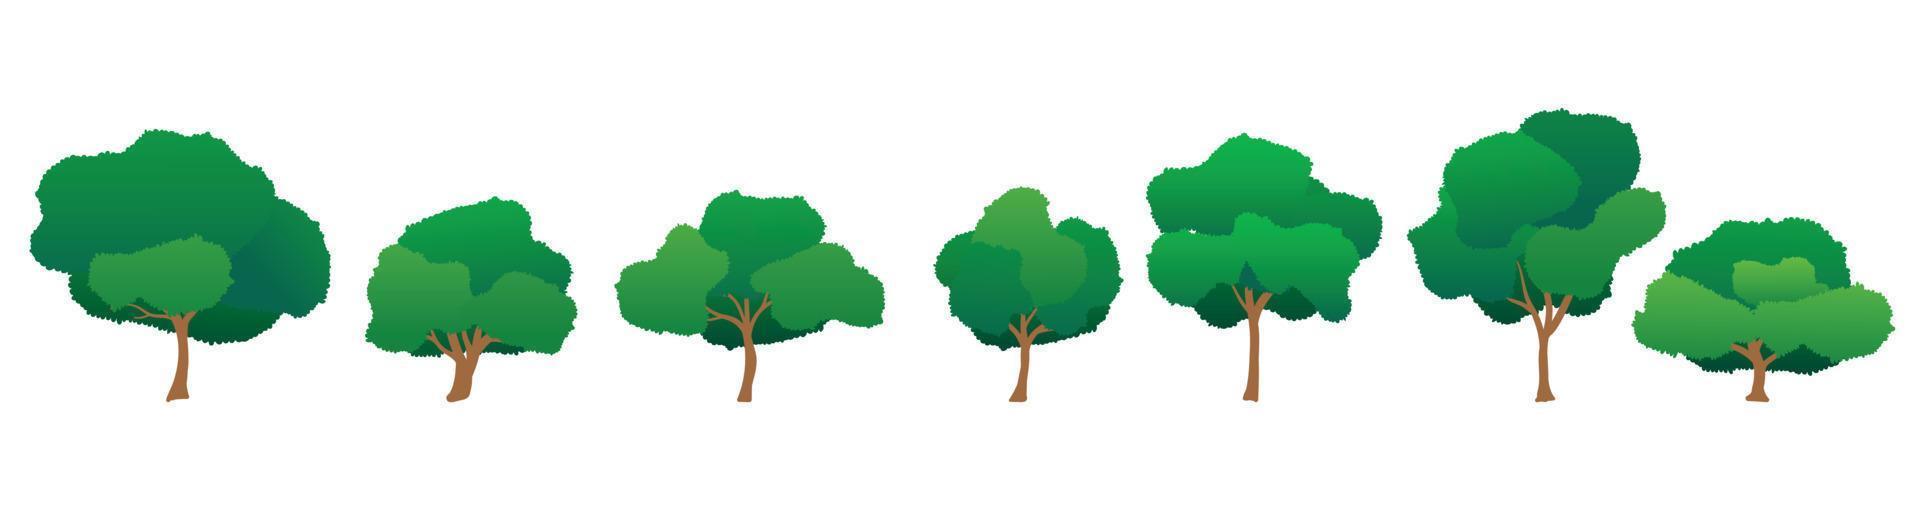 Collection of cartoon trees illustrations. Can be used to illustrate any nature or healthy lifestyle or ecology theme. vector